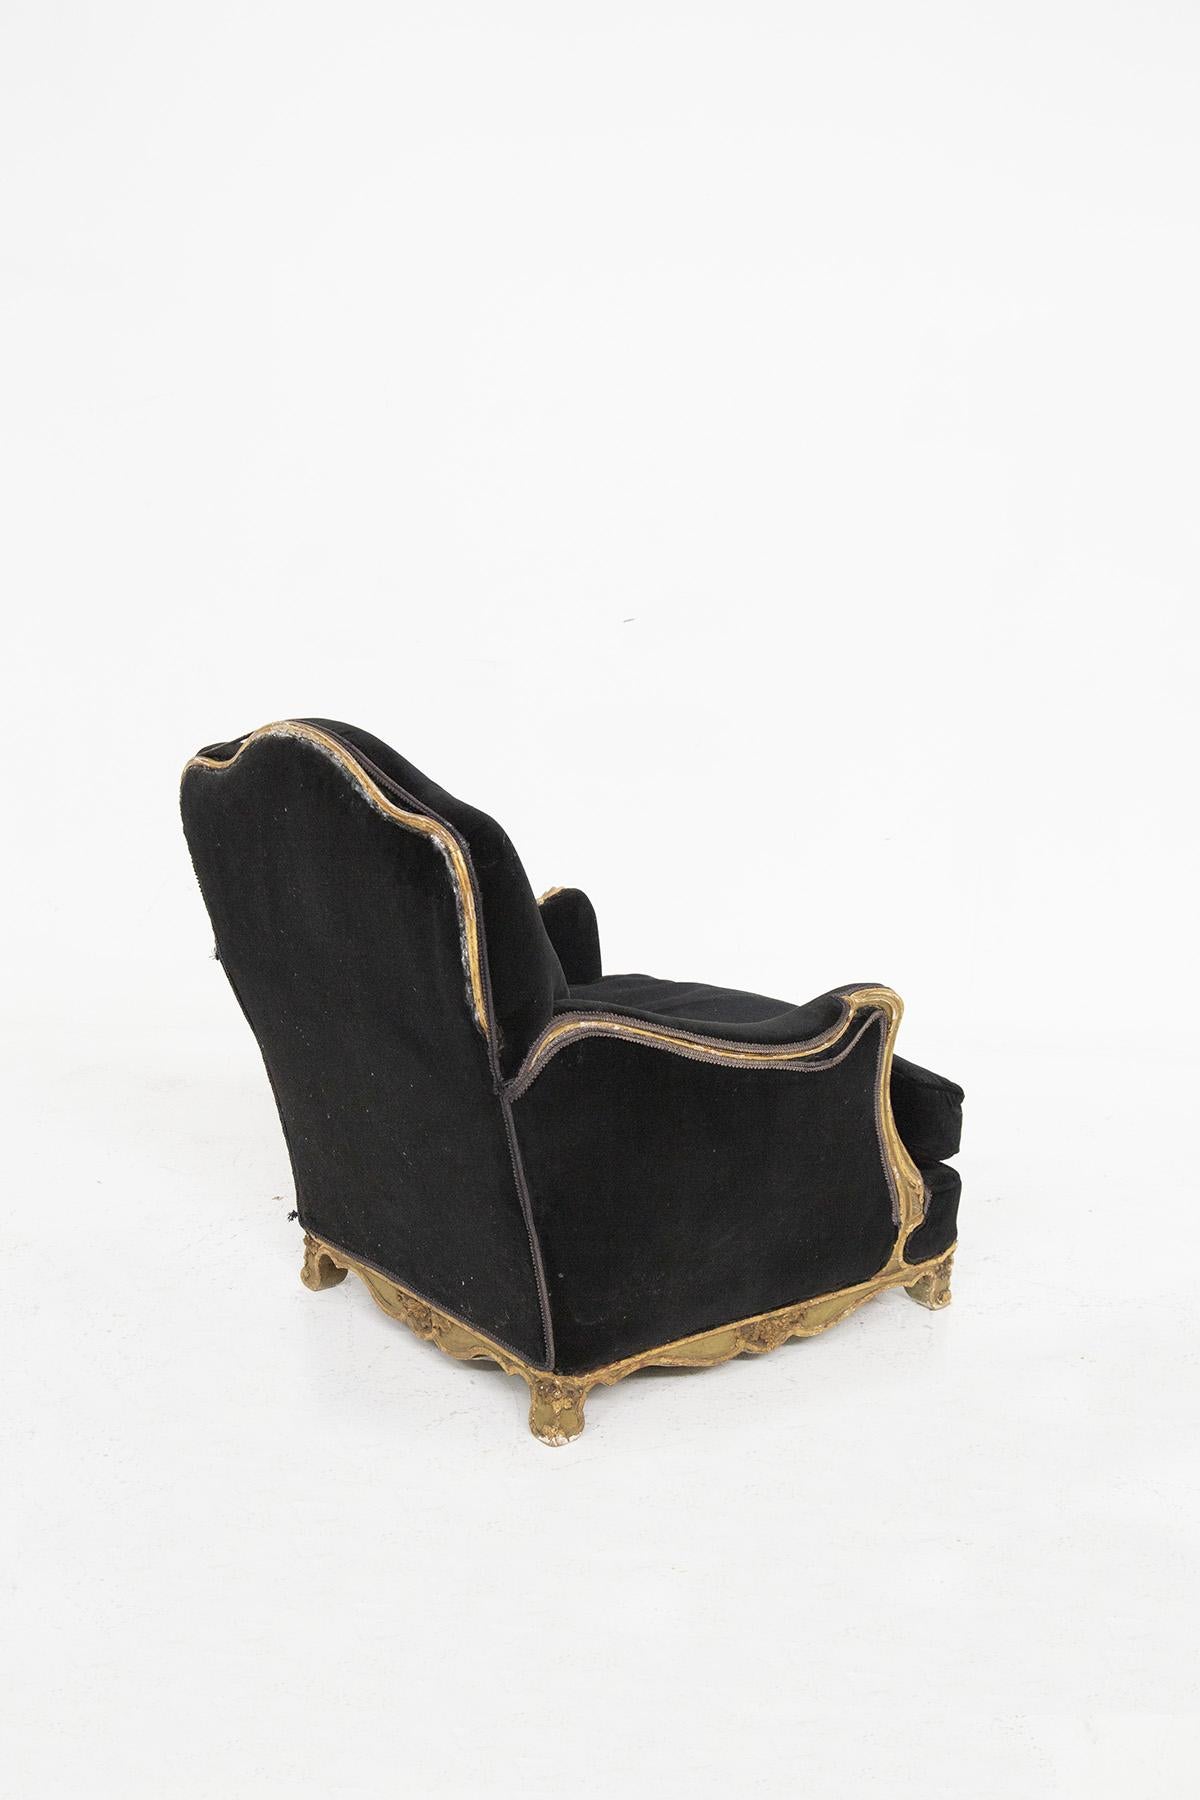 Baroque Armchair in Giltwood and Black Velvet For Sale 1